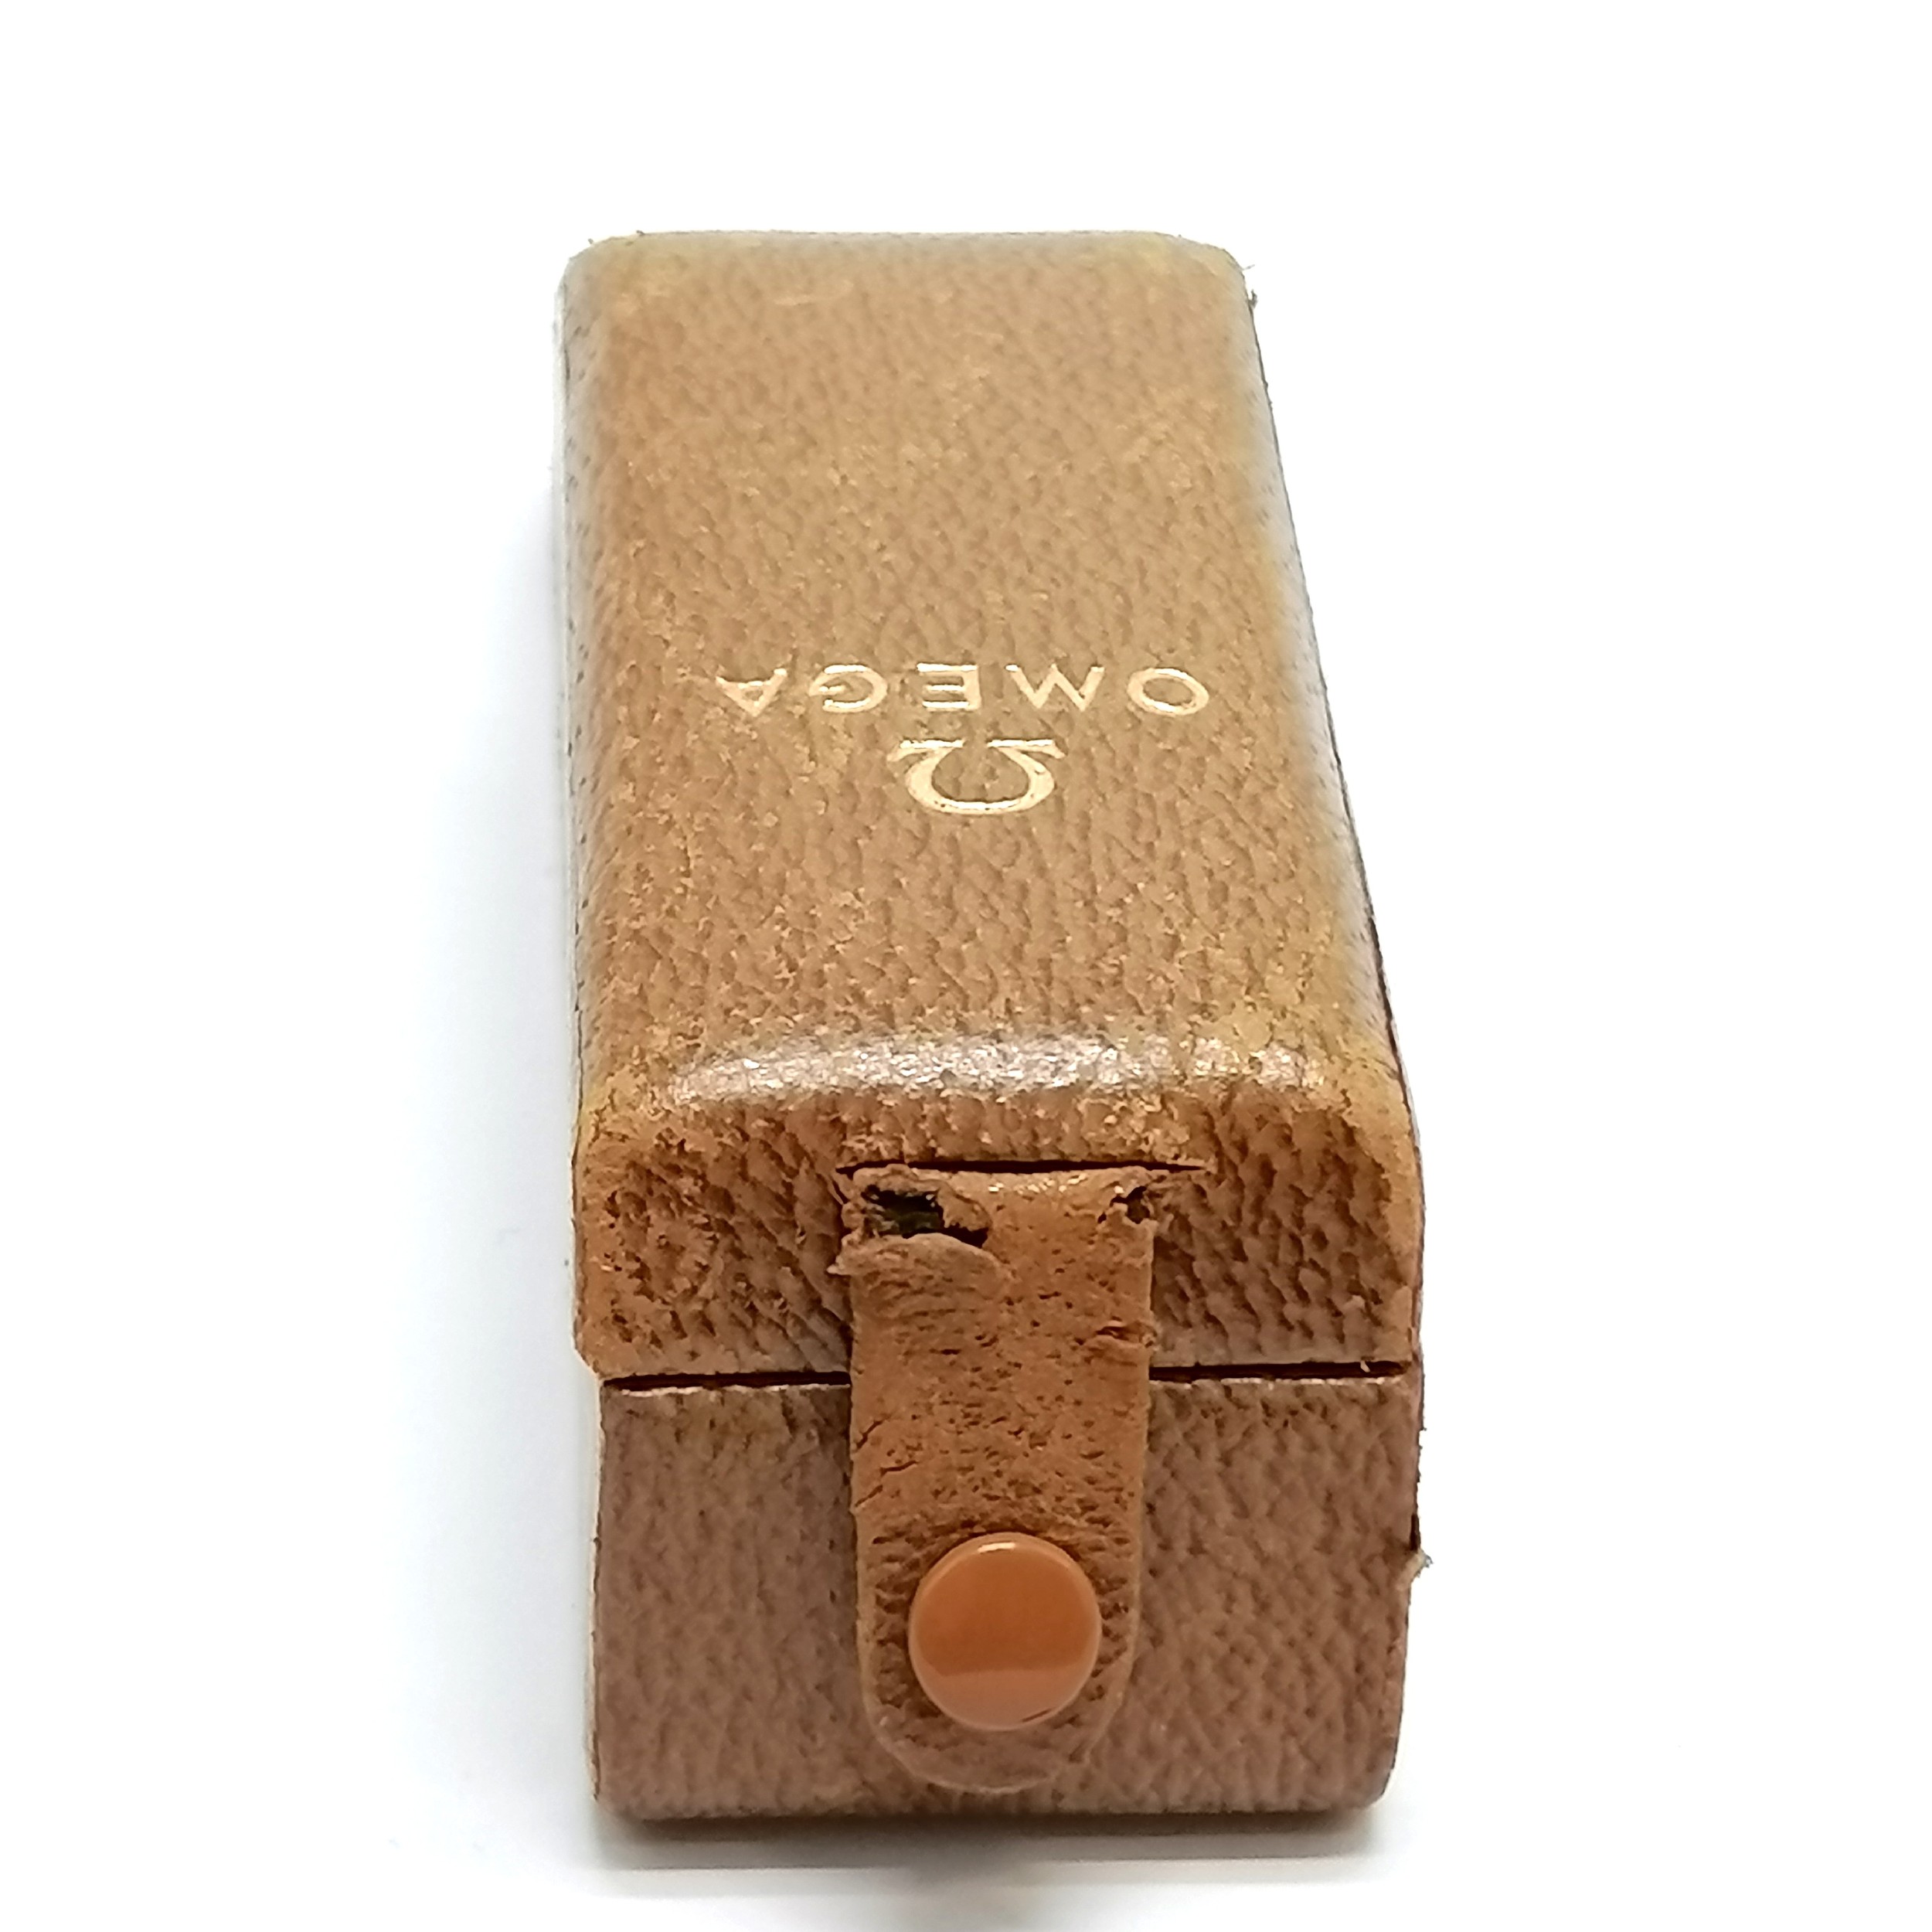 Omega vintage tan leather watch box - 12.2cm long x 4cm across and has original pad ~ tag clasp - Image 3 of 3